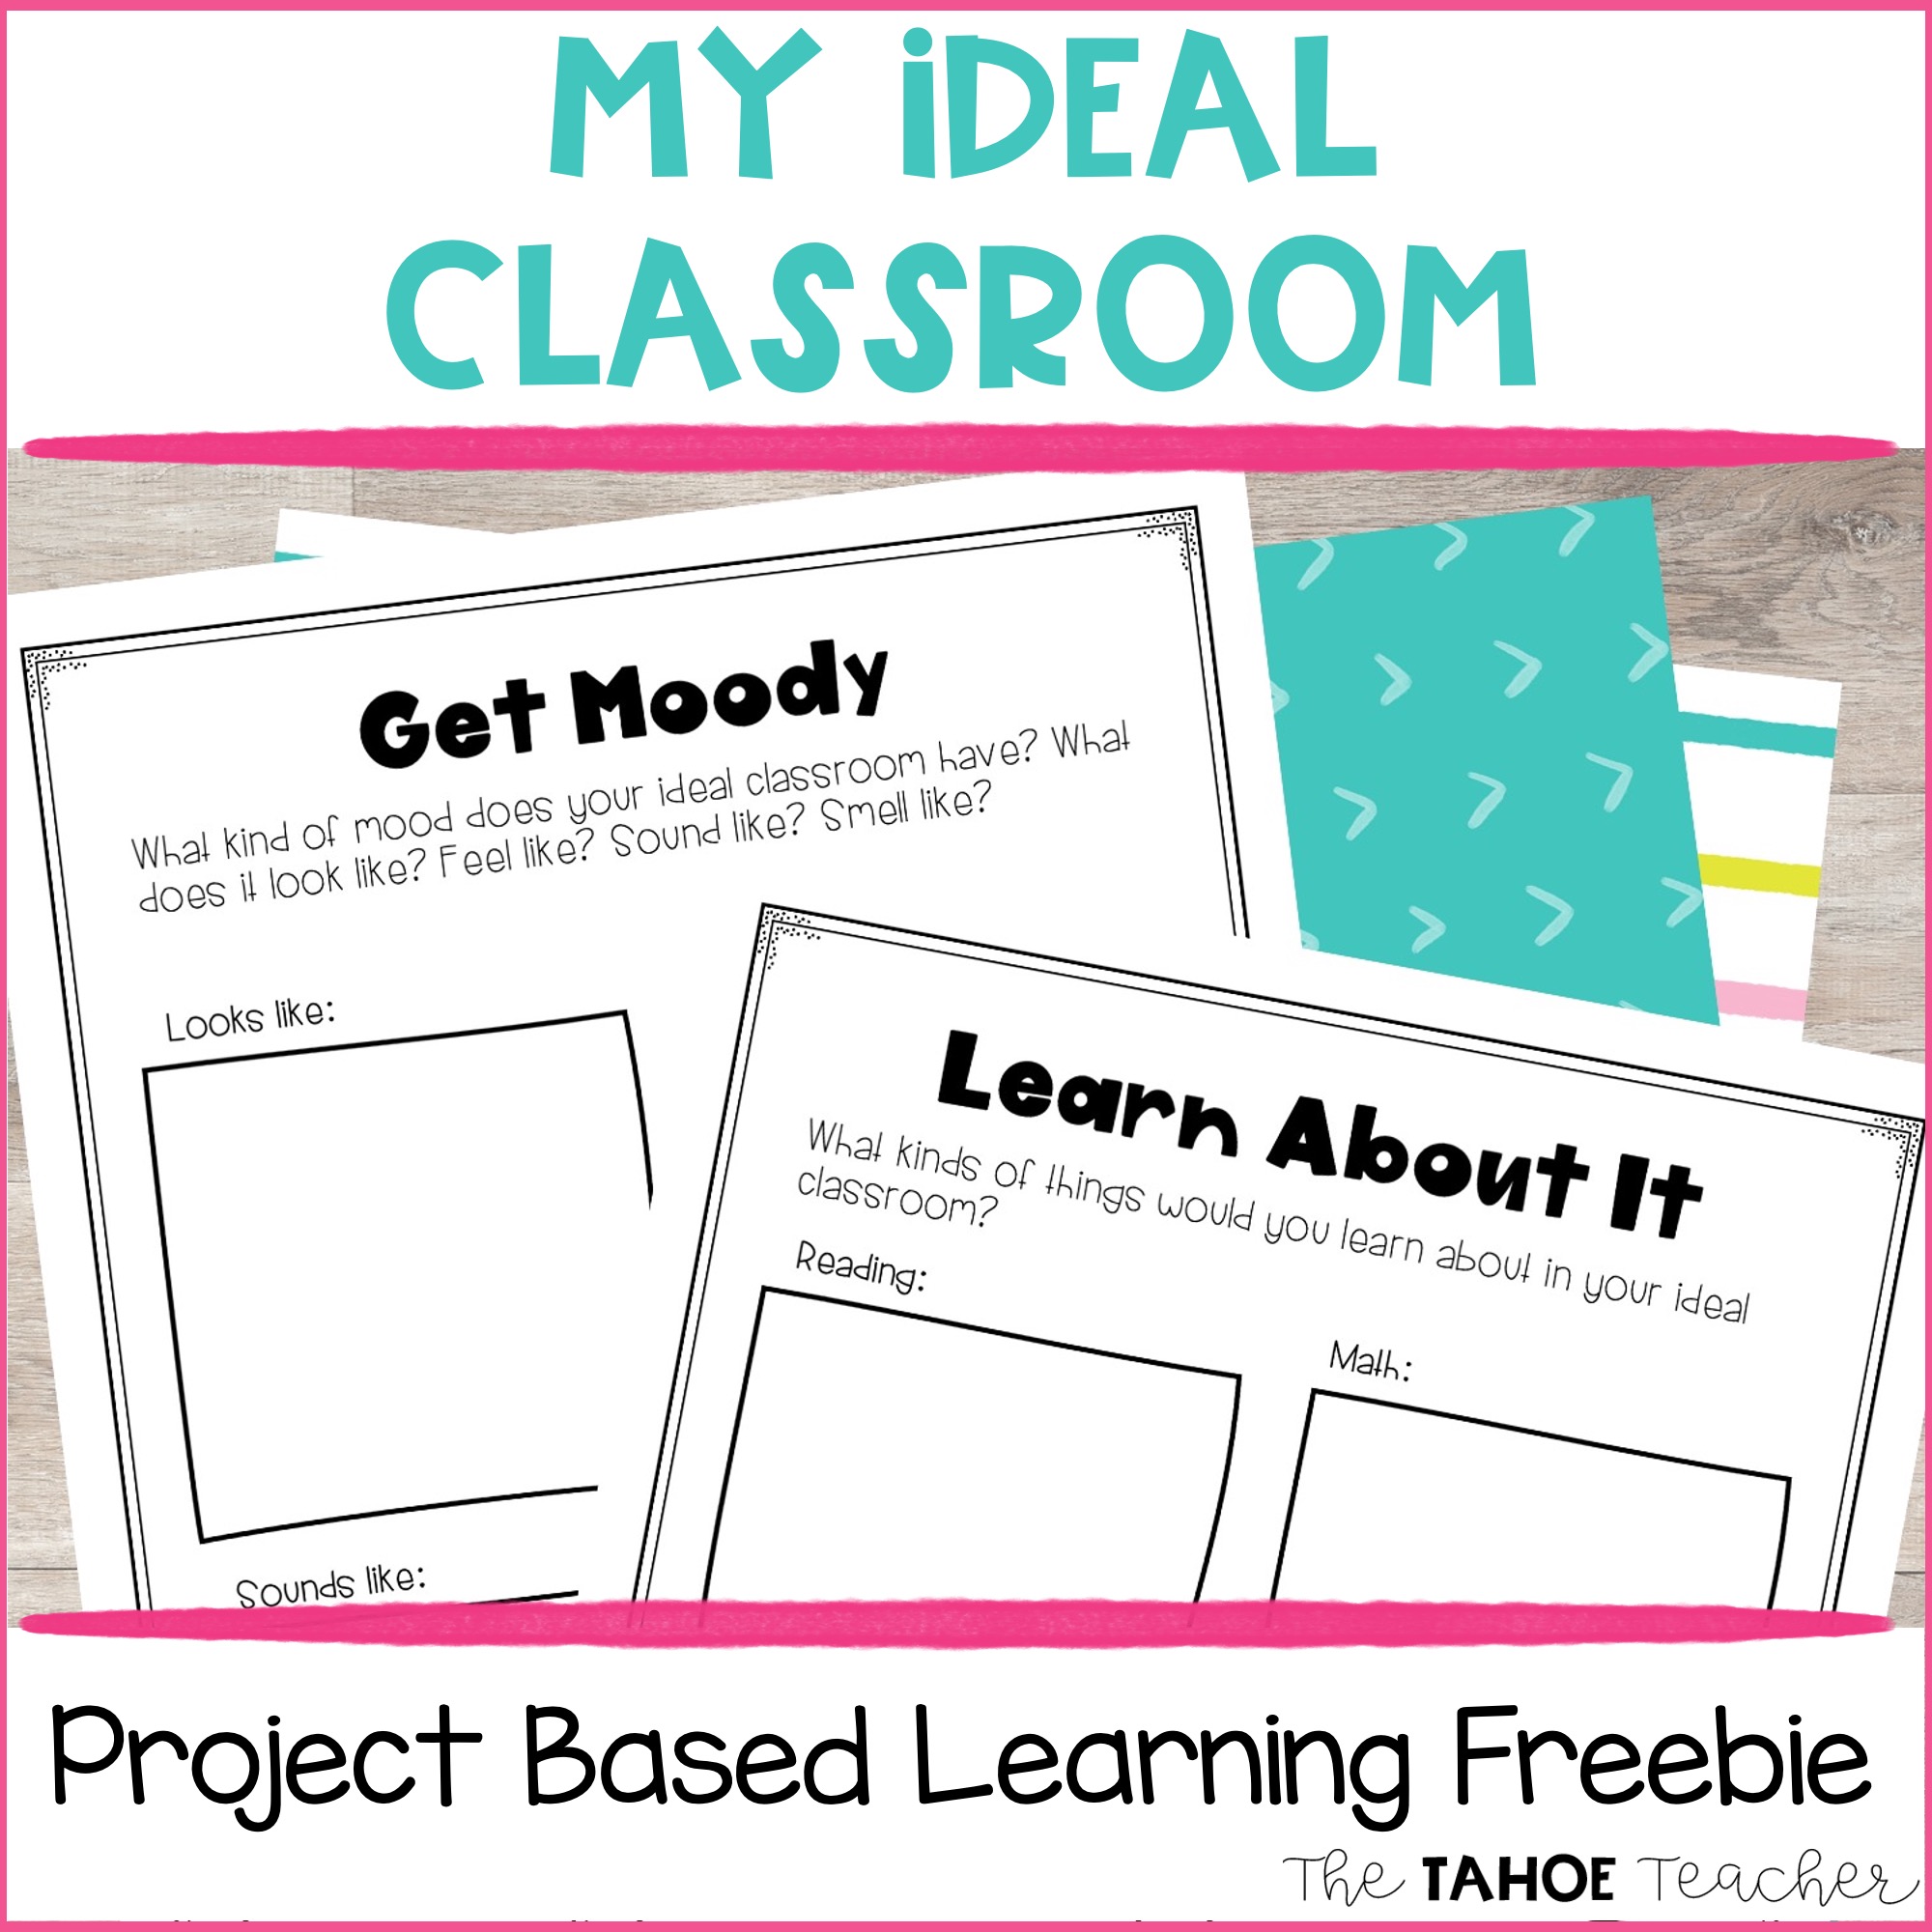 Designing Our Ideal Classroom Project Based Learning Back to School Freebie